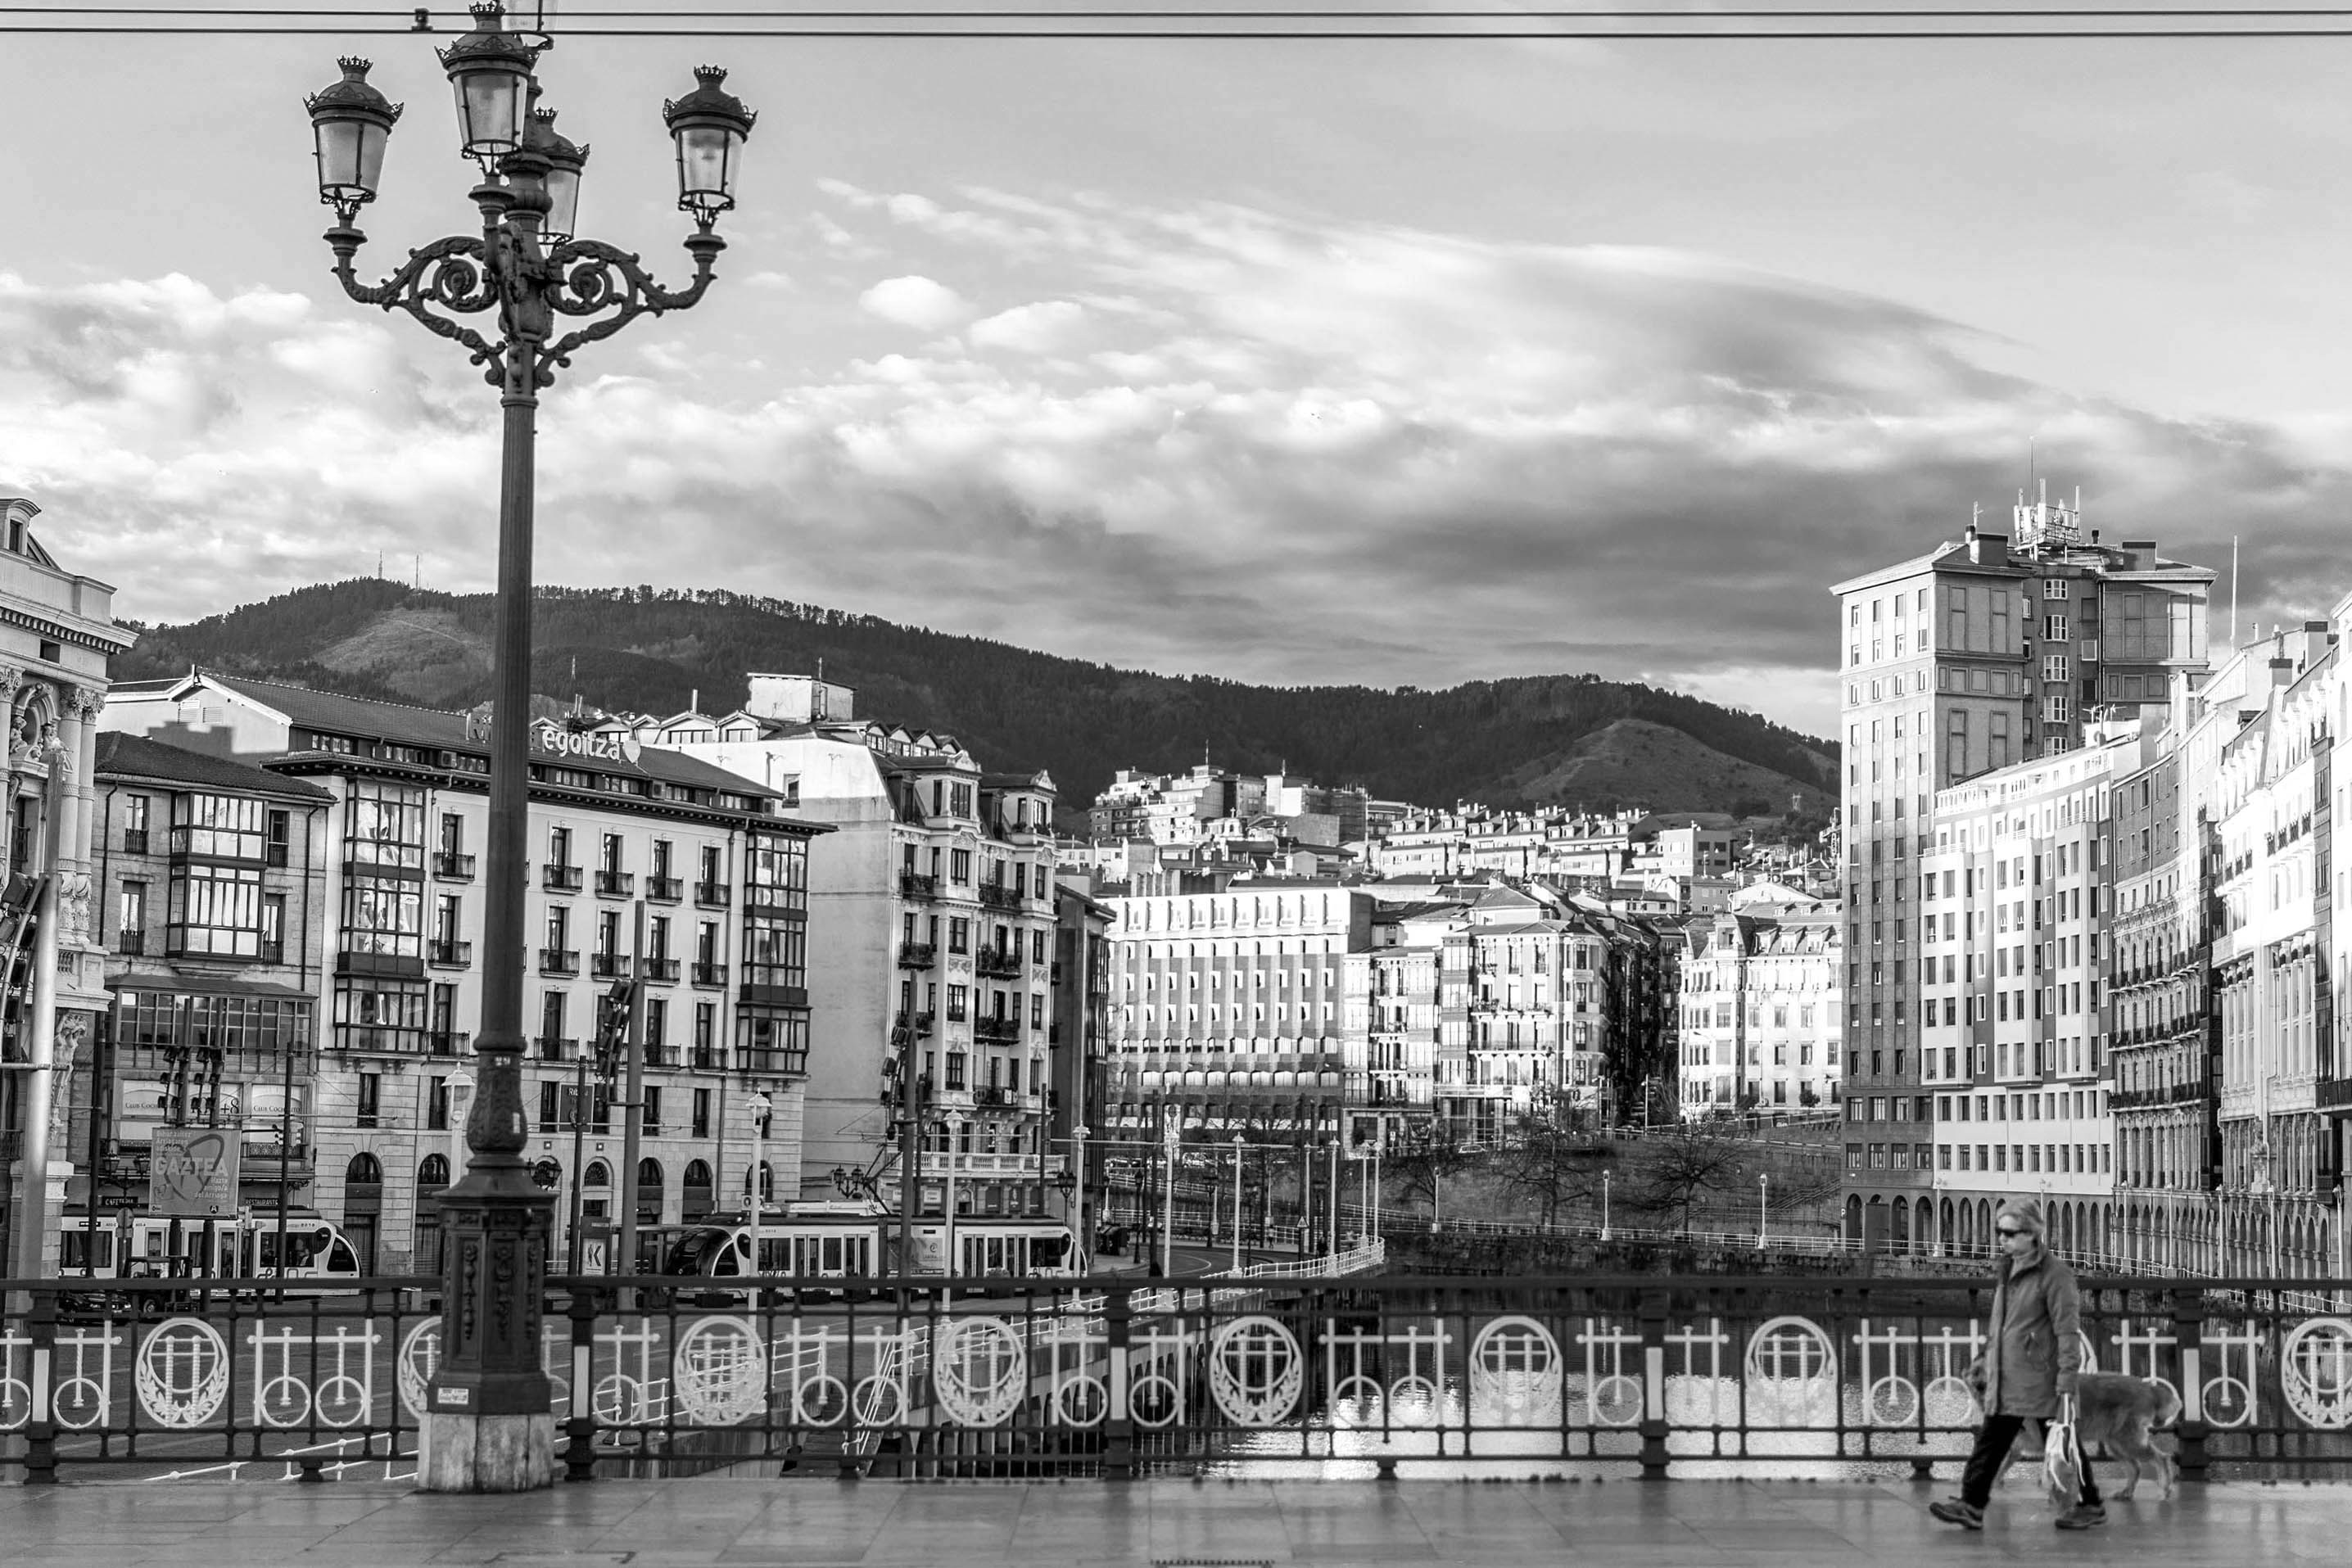 Image of the Bilbao estuary taken from the Arenal Bridge